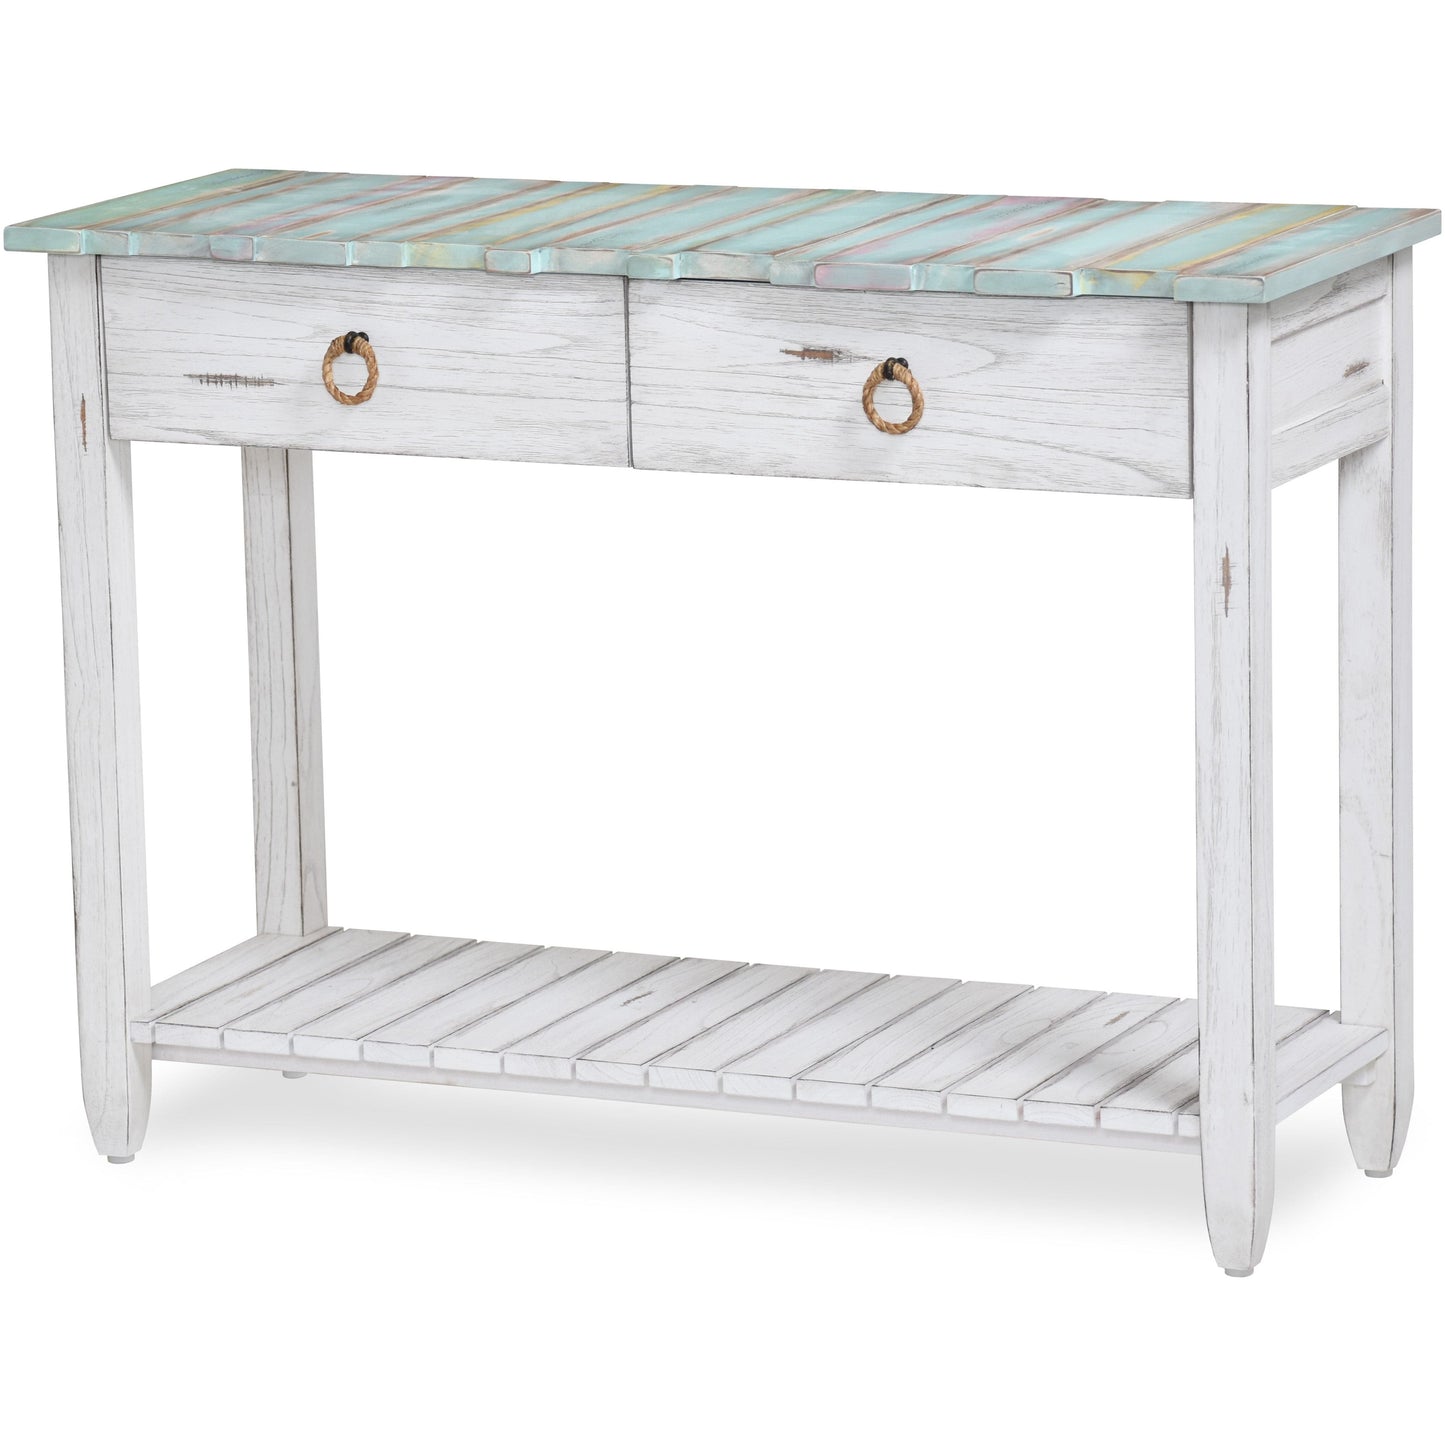 Sea Winds Trading Picket Fence Console Table B78204 Indoor Sea Winds Trading Co 